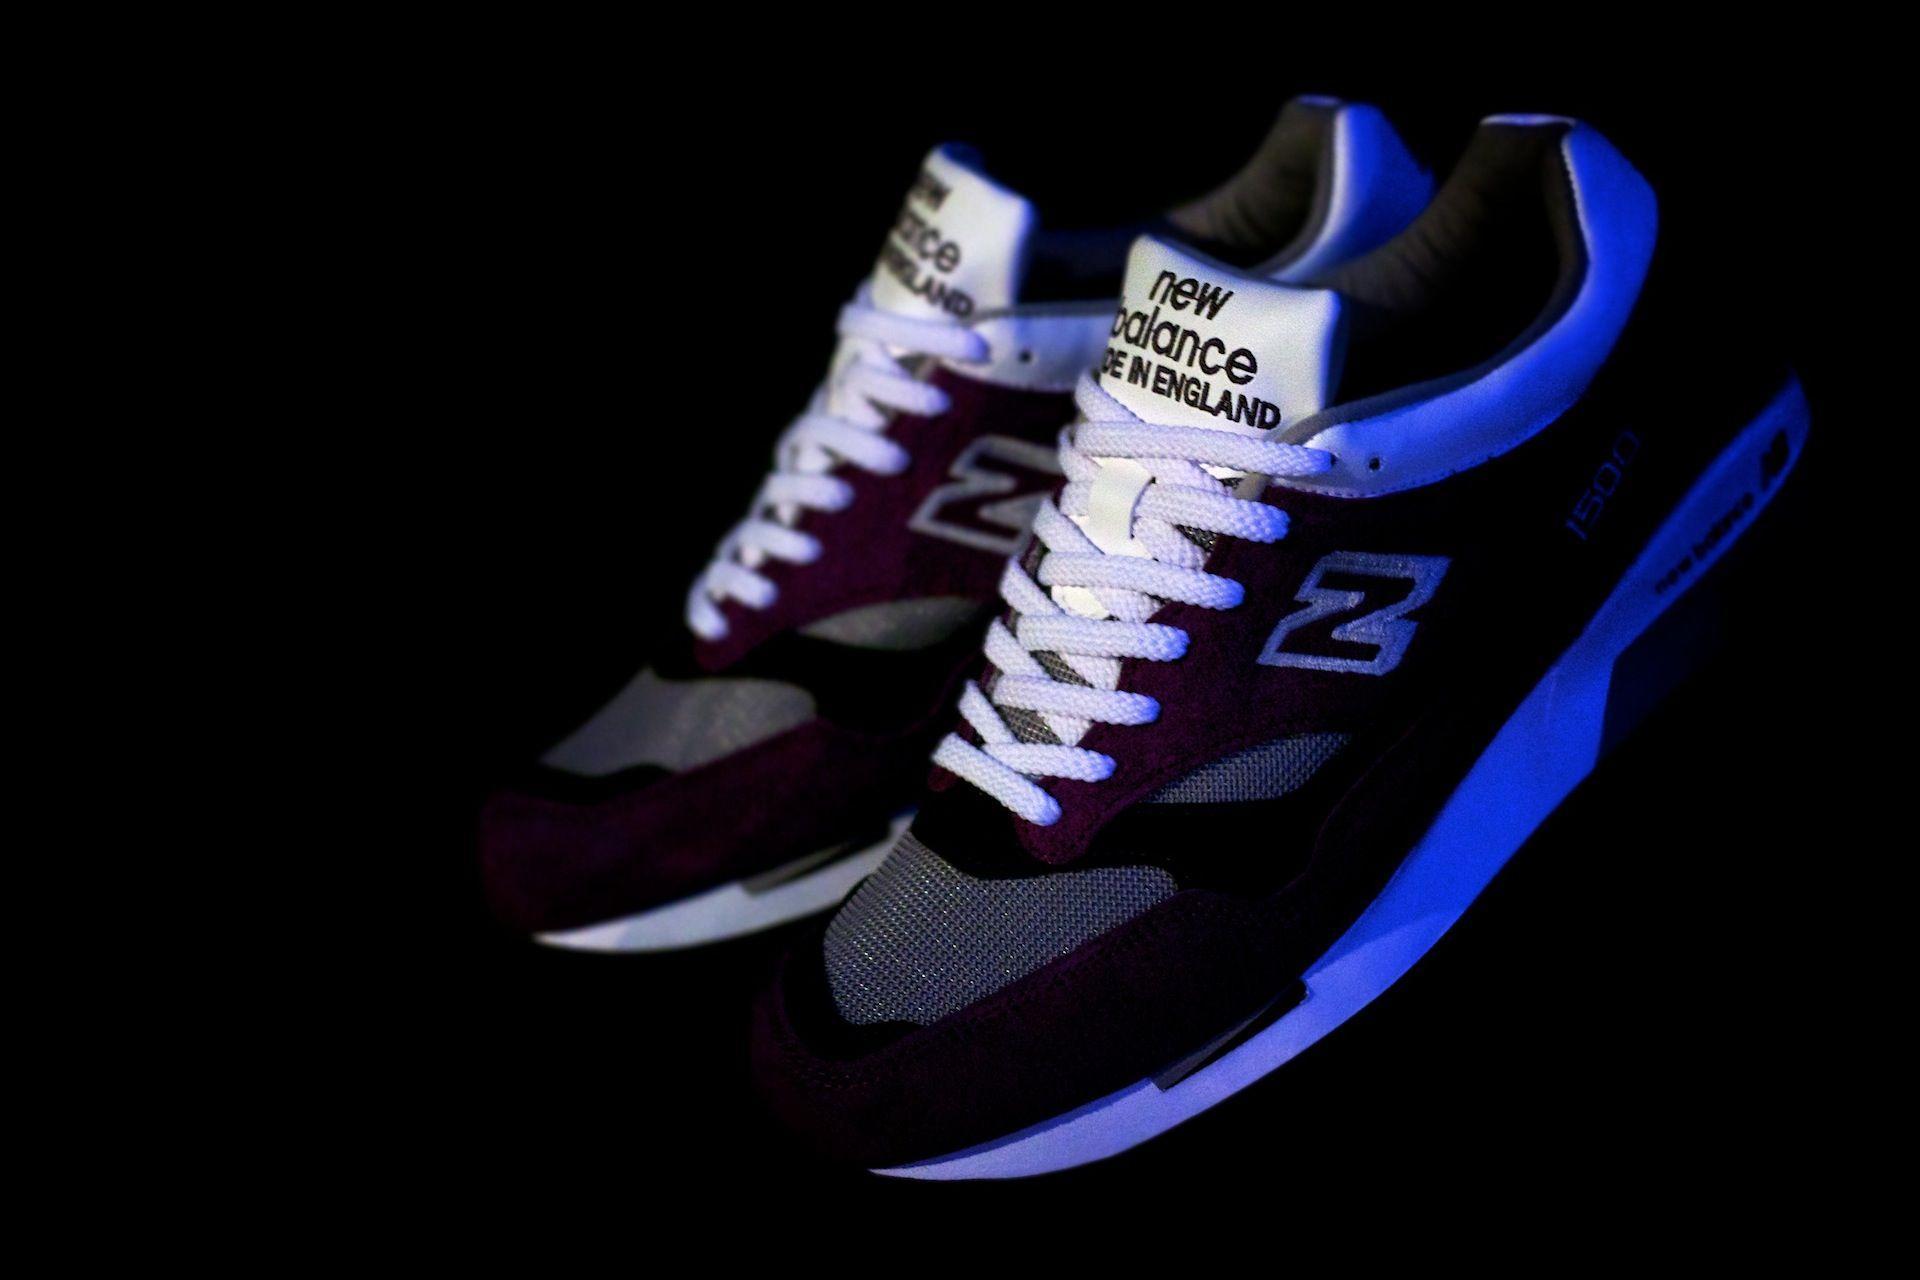 A pair of new balance sneakers in the dark. - New Balance